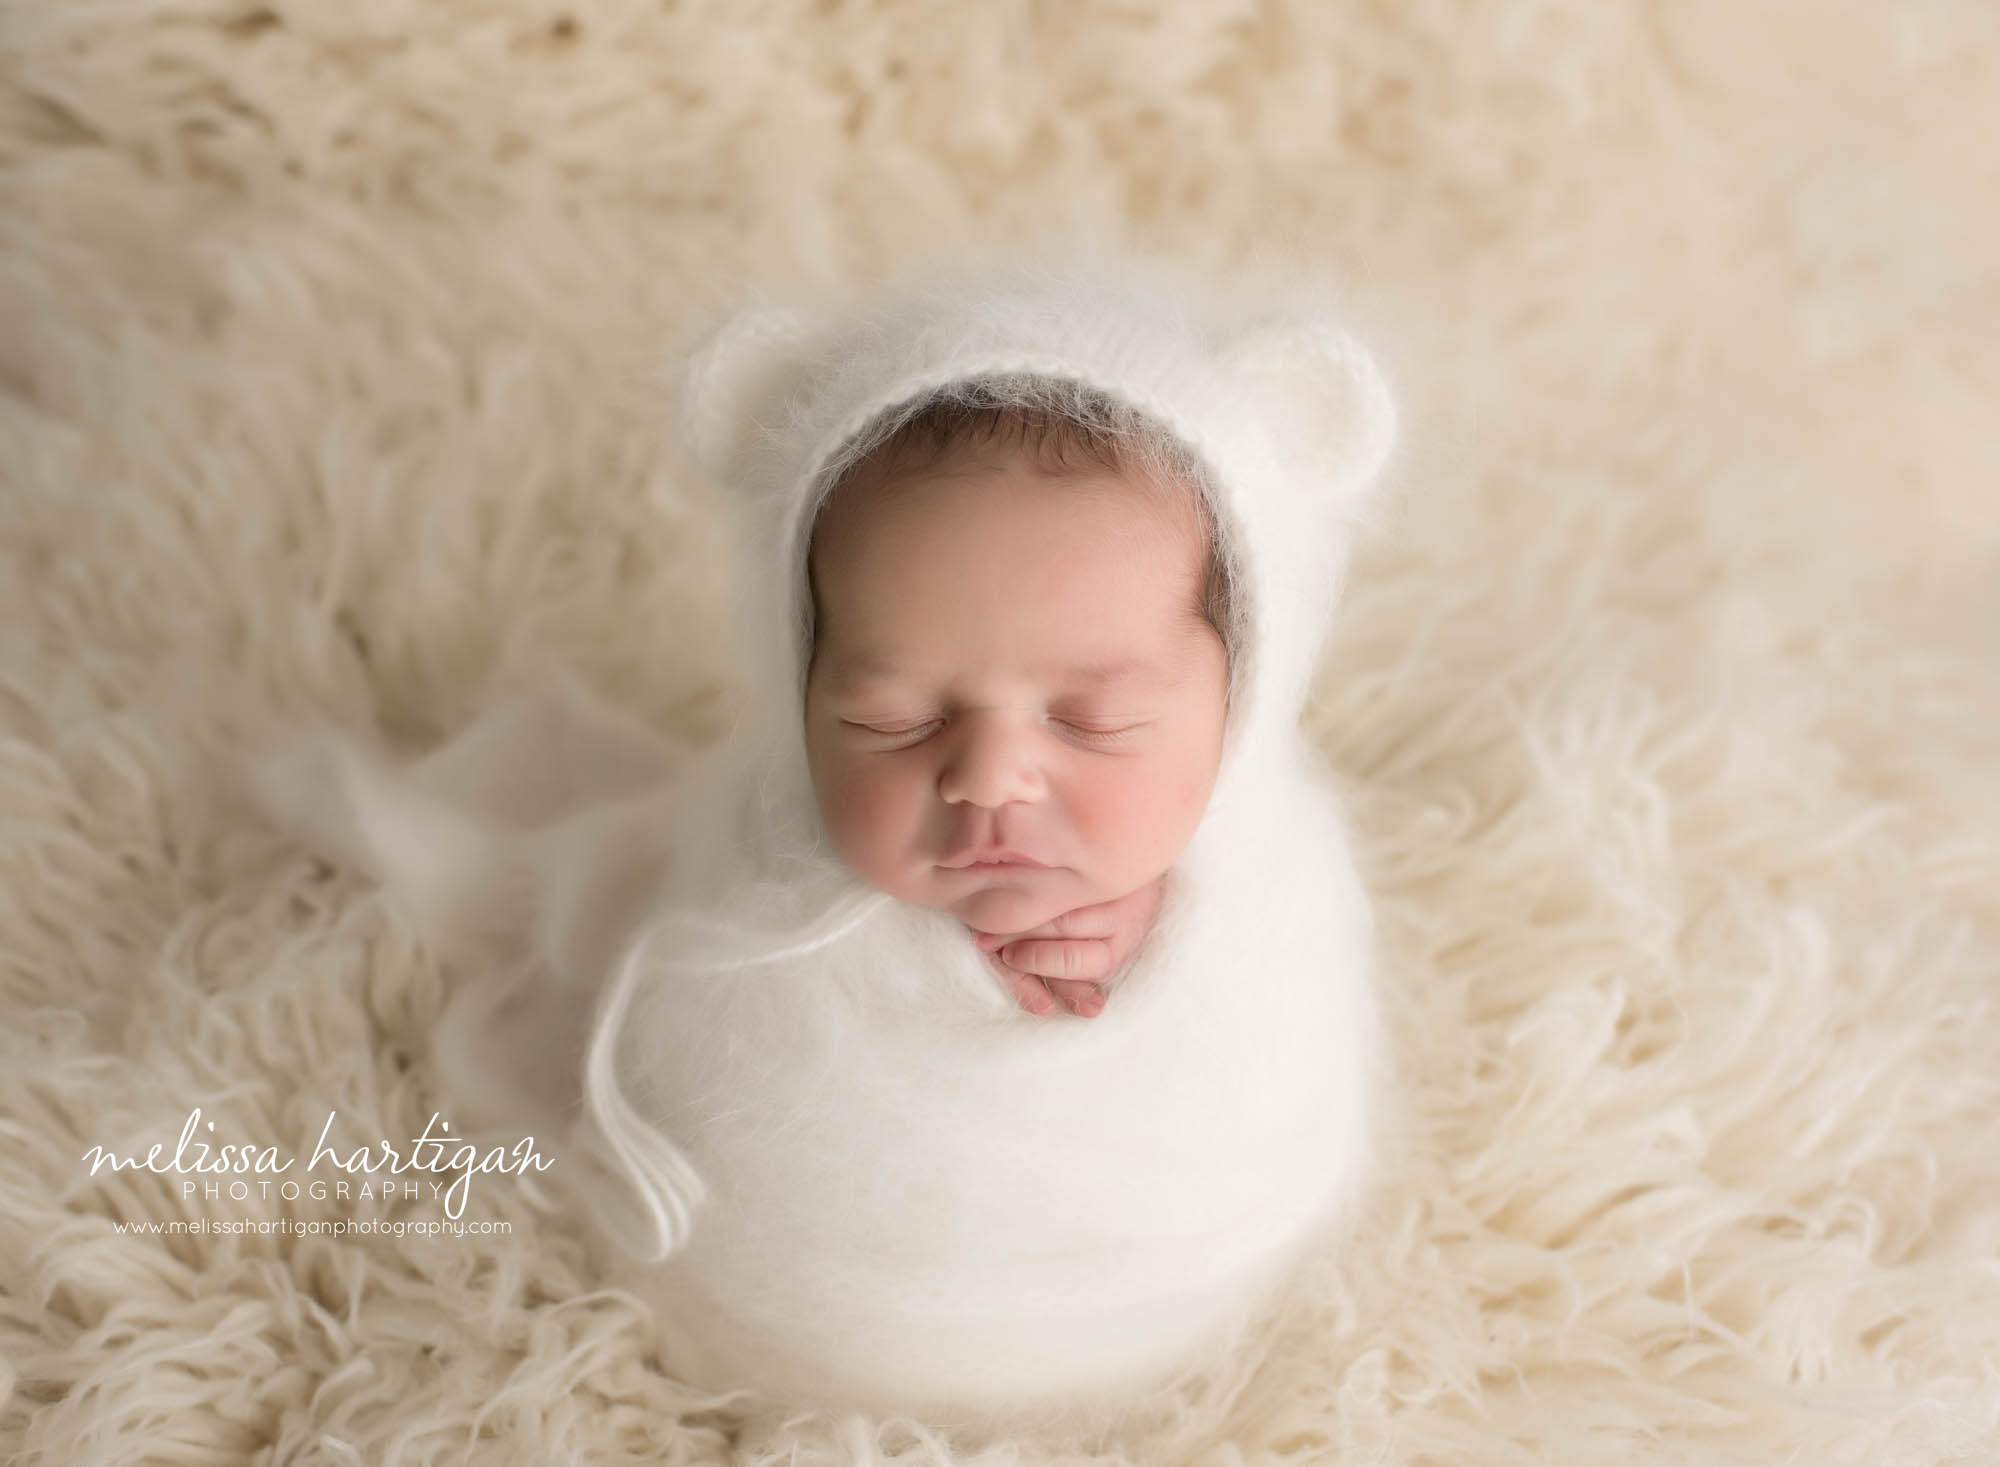 Newborn baby boy wrapped in white knitted wrap with matching bear bonnet Hartford county Newborn photographer